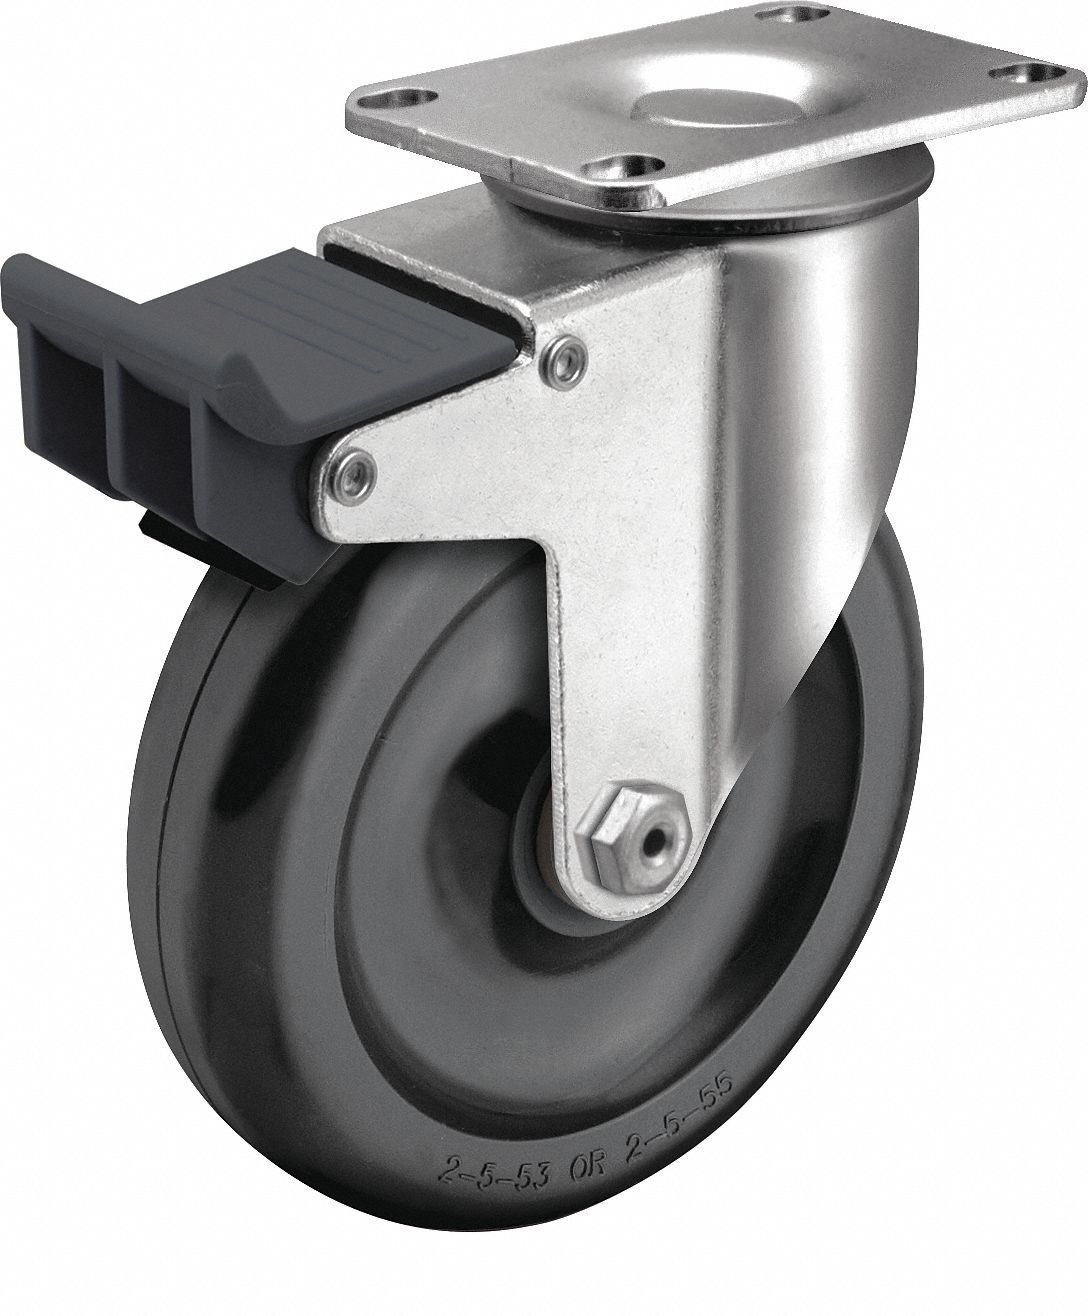 275 lbs Capacity Jarvis 30 Series 4 Diameter PolyLoc Gray Wheel Rigid Plate Caster with Delrin Bearing 3-5/8 Length X 2-3/8 Width Plate 